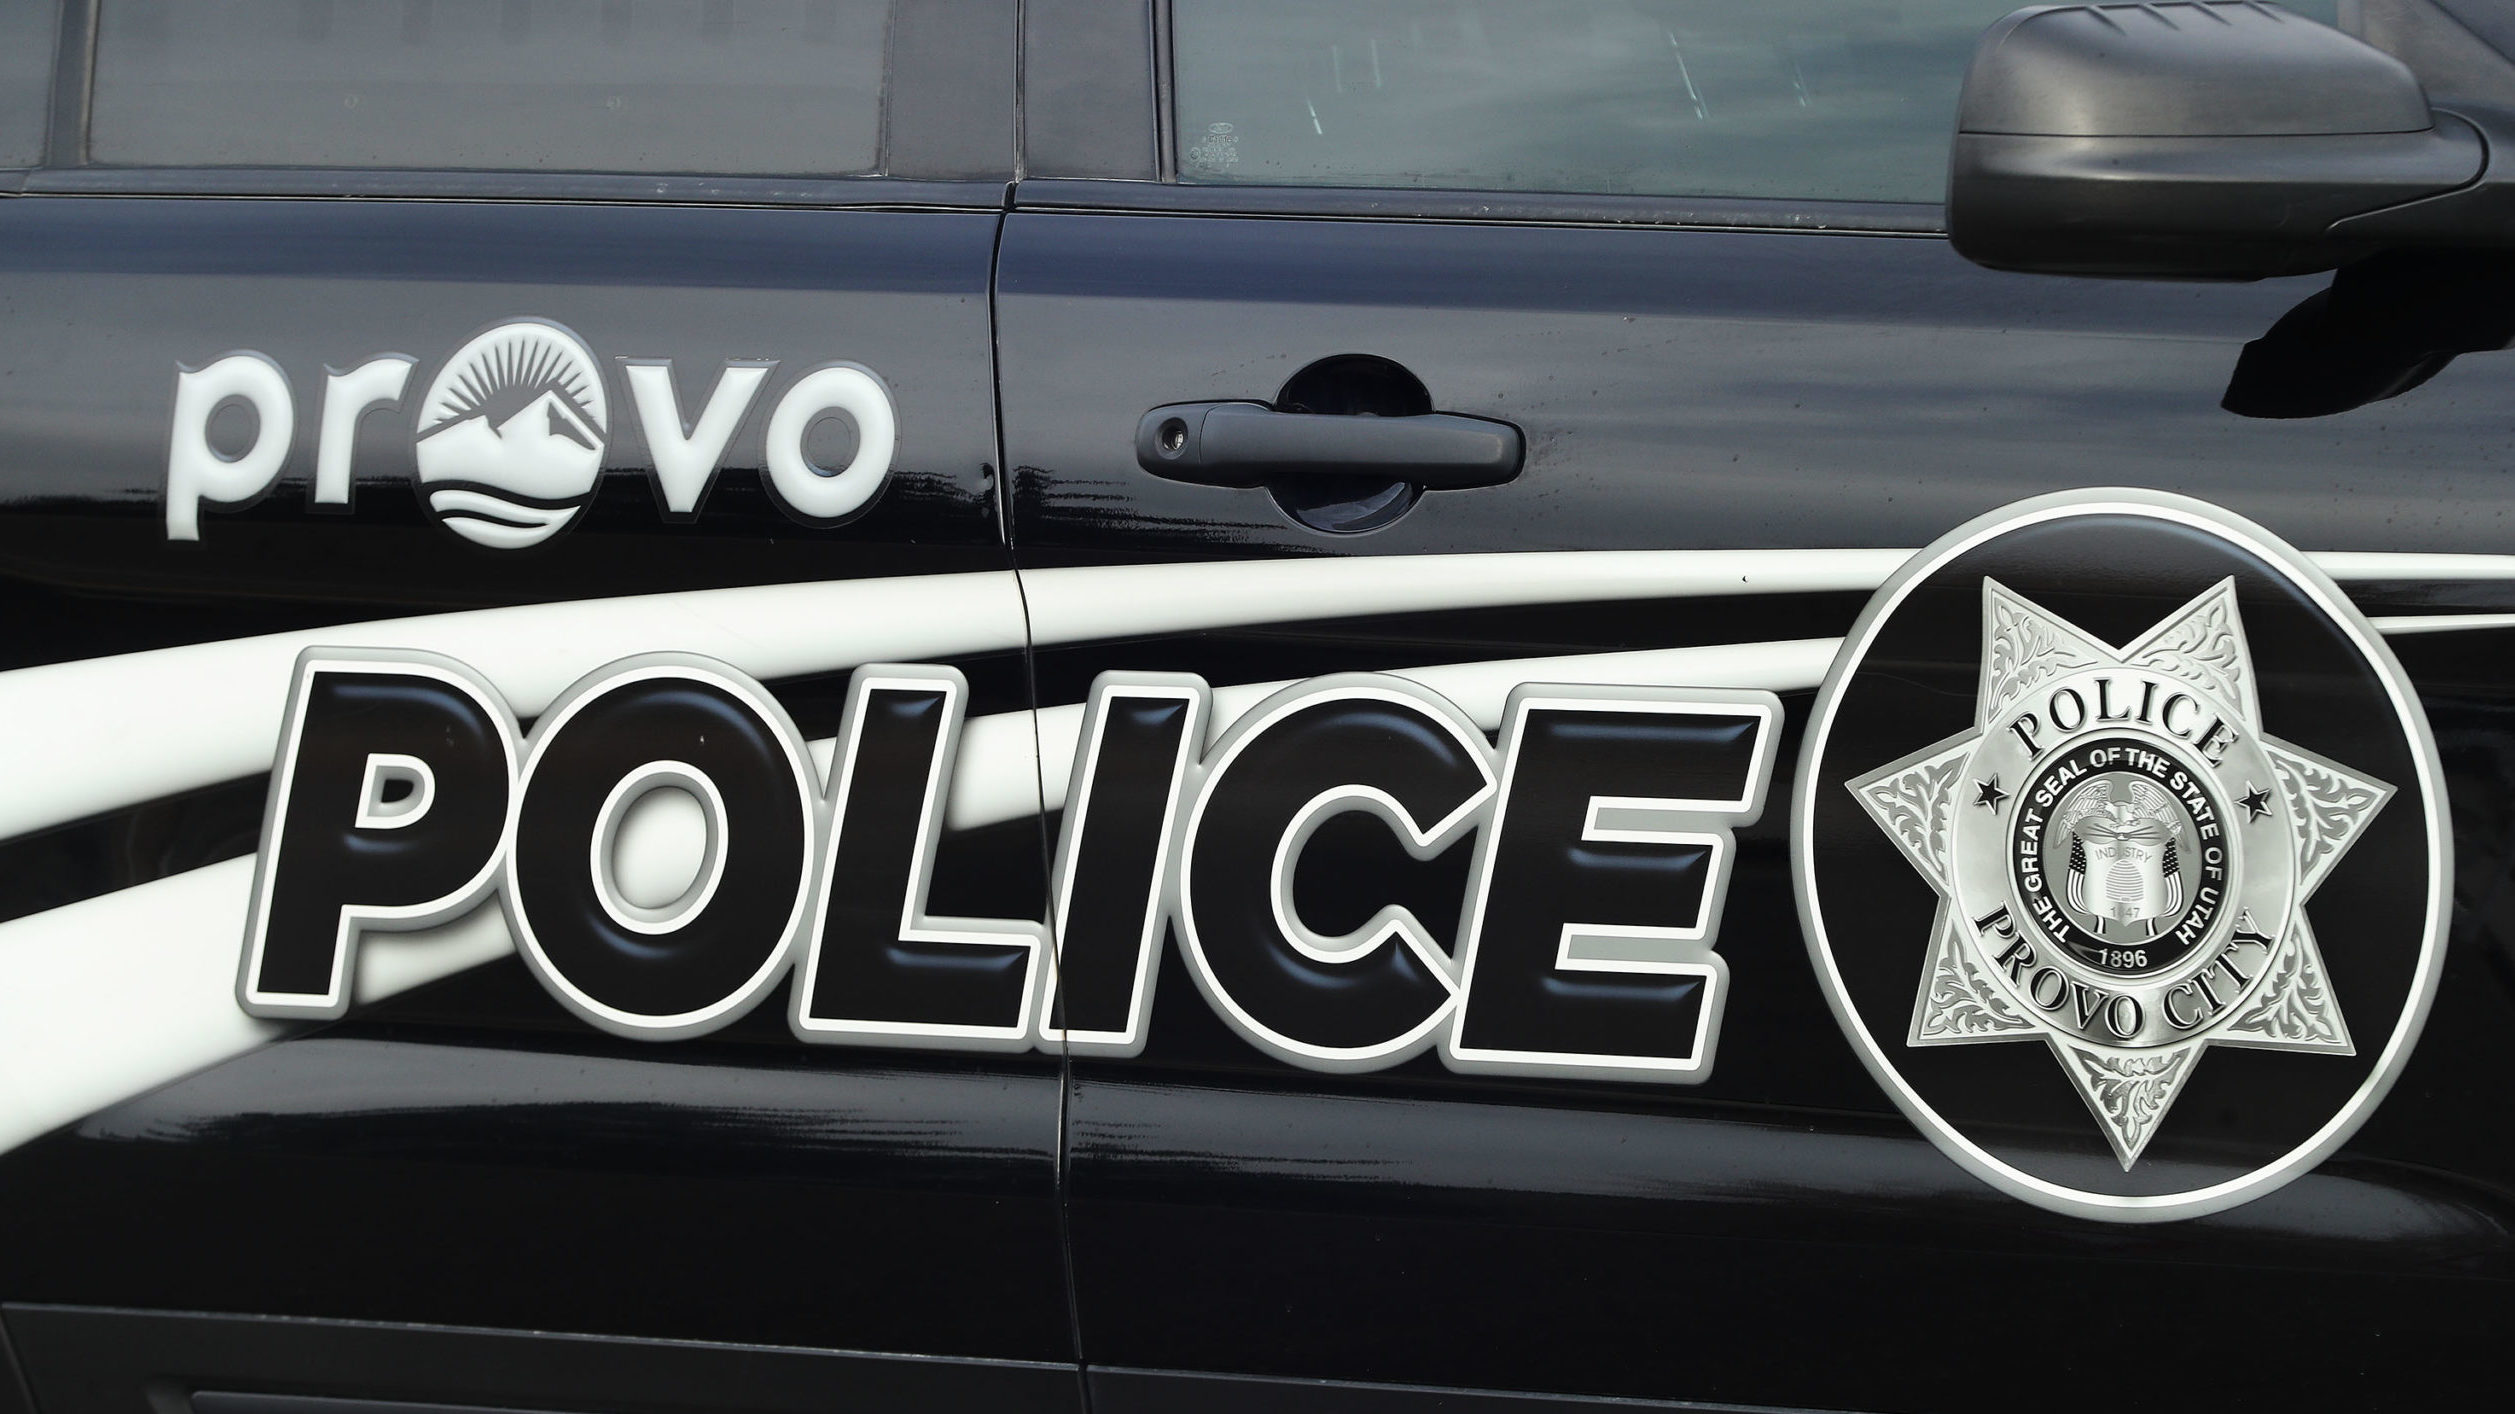 Provo Police car pictured, they are investigating a crash on state street...